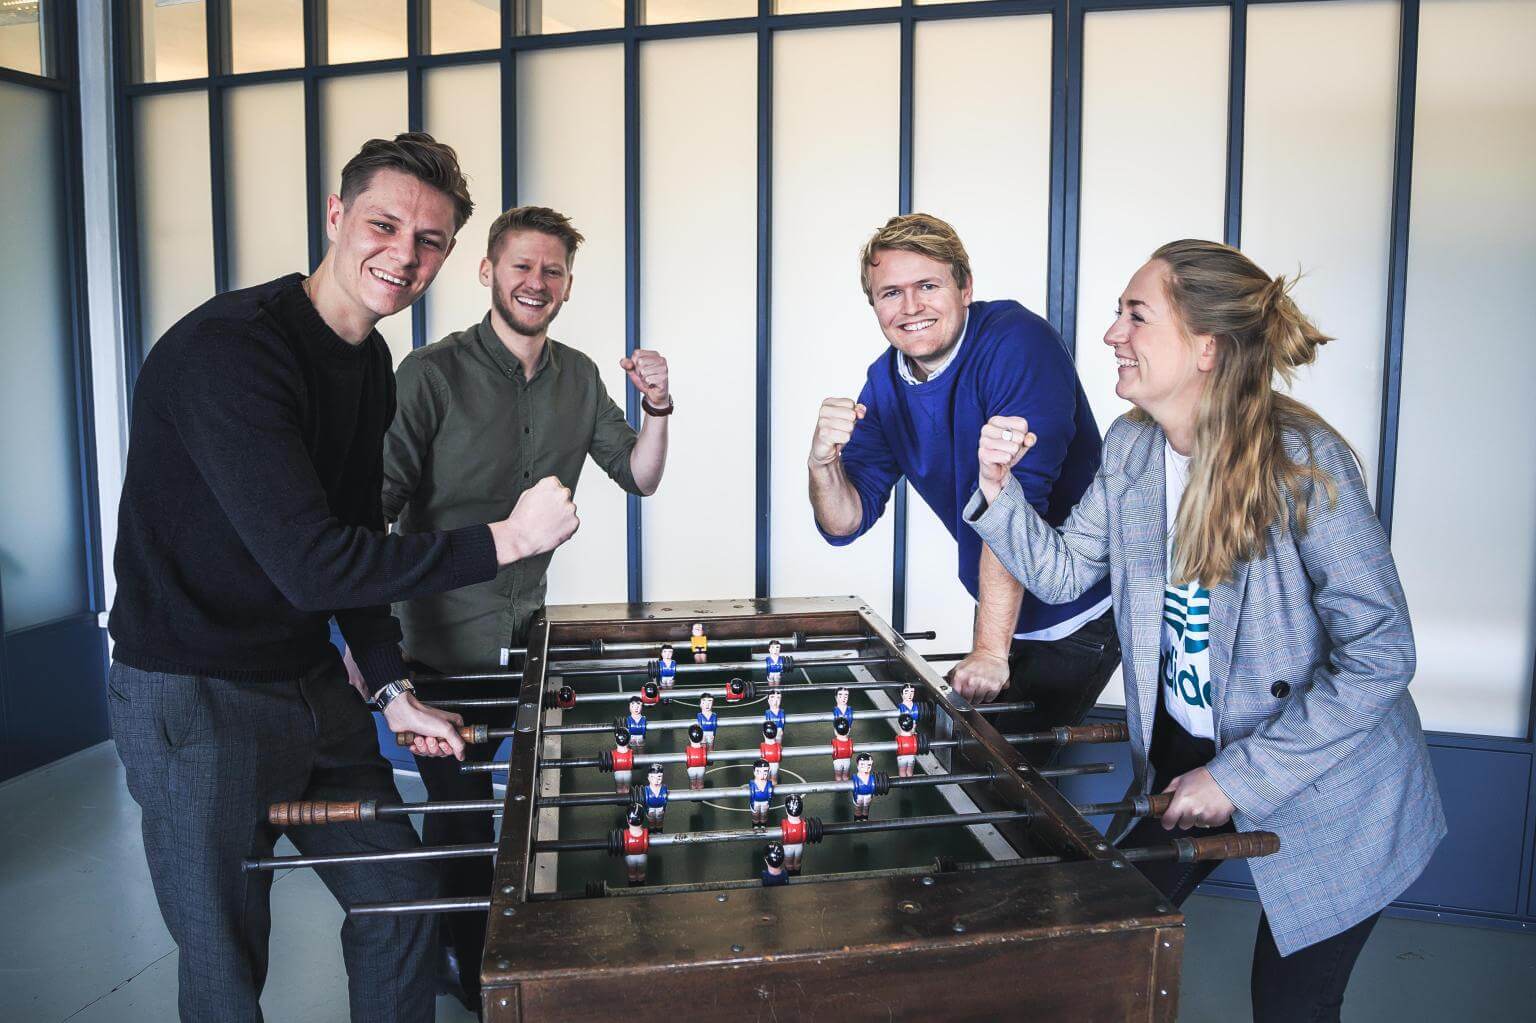 Employees playing table football